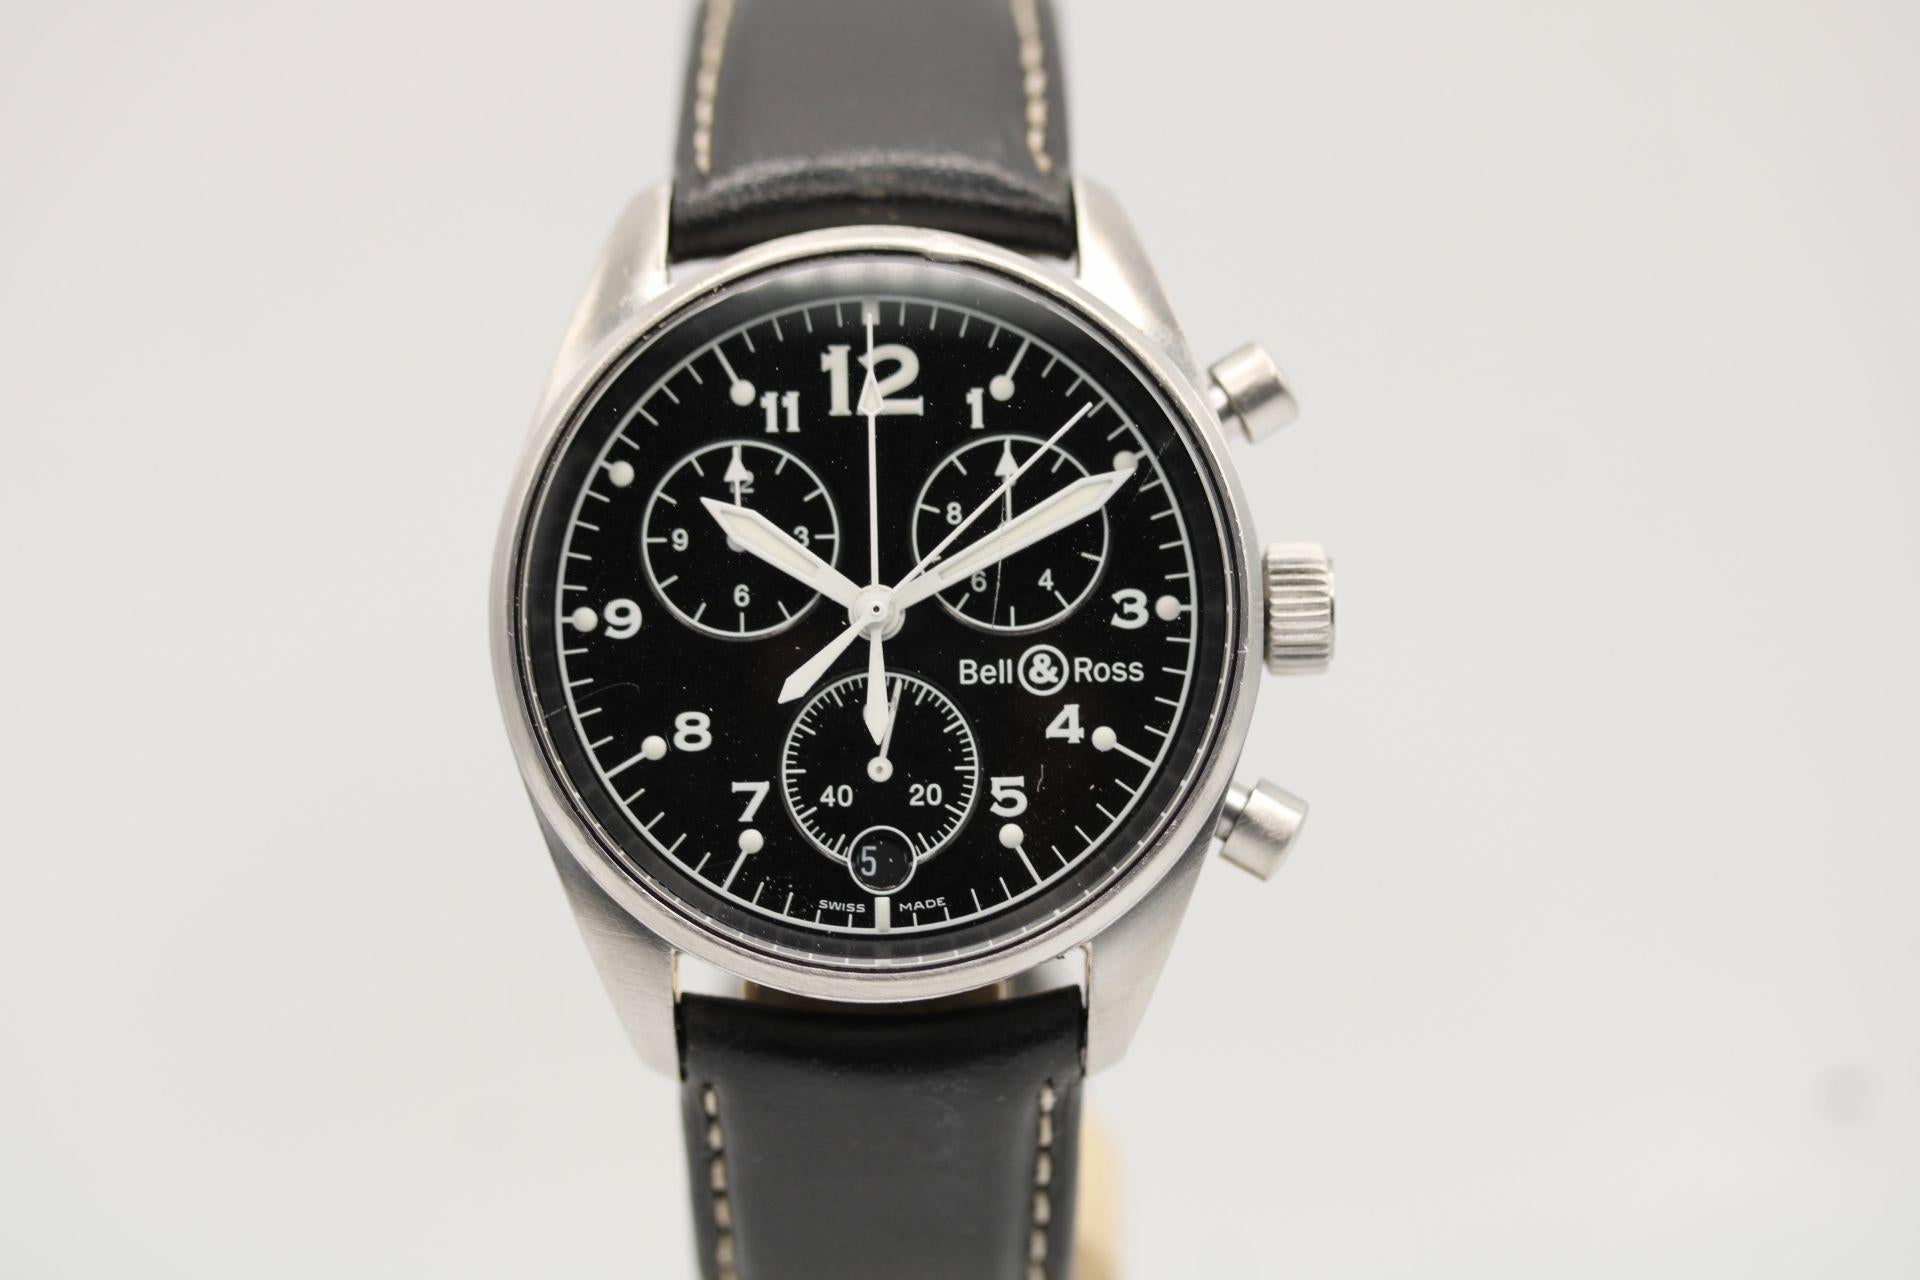 Watch: Bell and Ross Vintage 120
Stock Number: CHW5422
Price: £1150.00

A beautiful looking Chronograph Vintage 120 Bell and Ross is a hard to find model and even more so with a black dial.

38mm stainless steel case this is a quartz battery powered